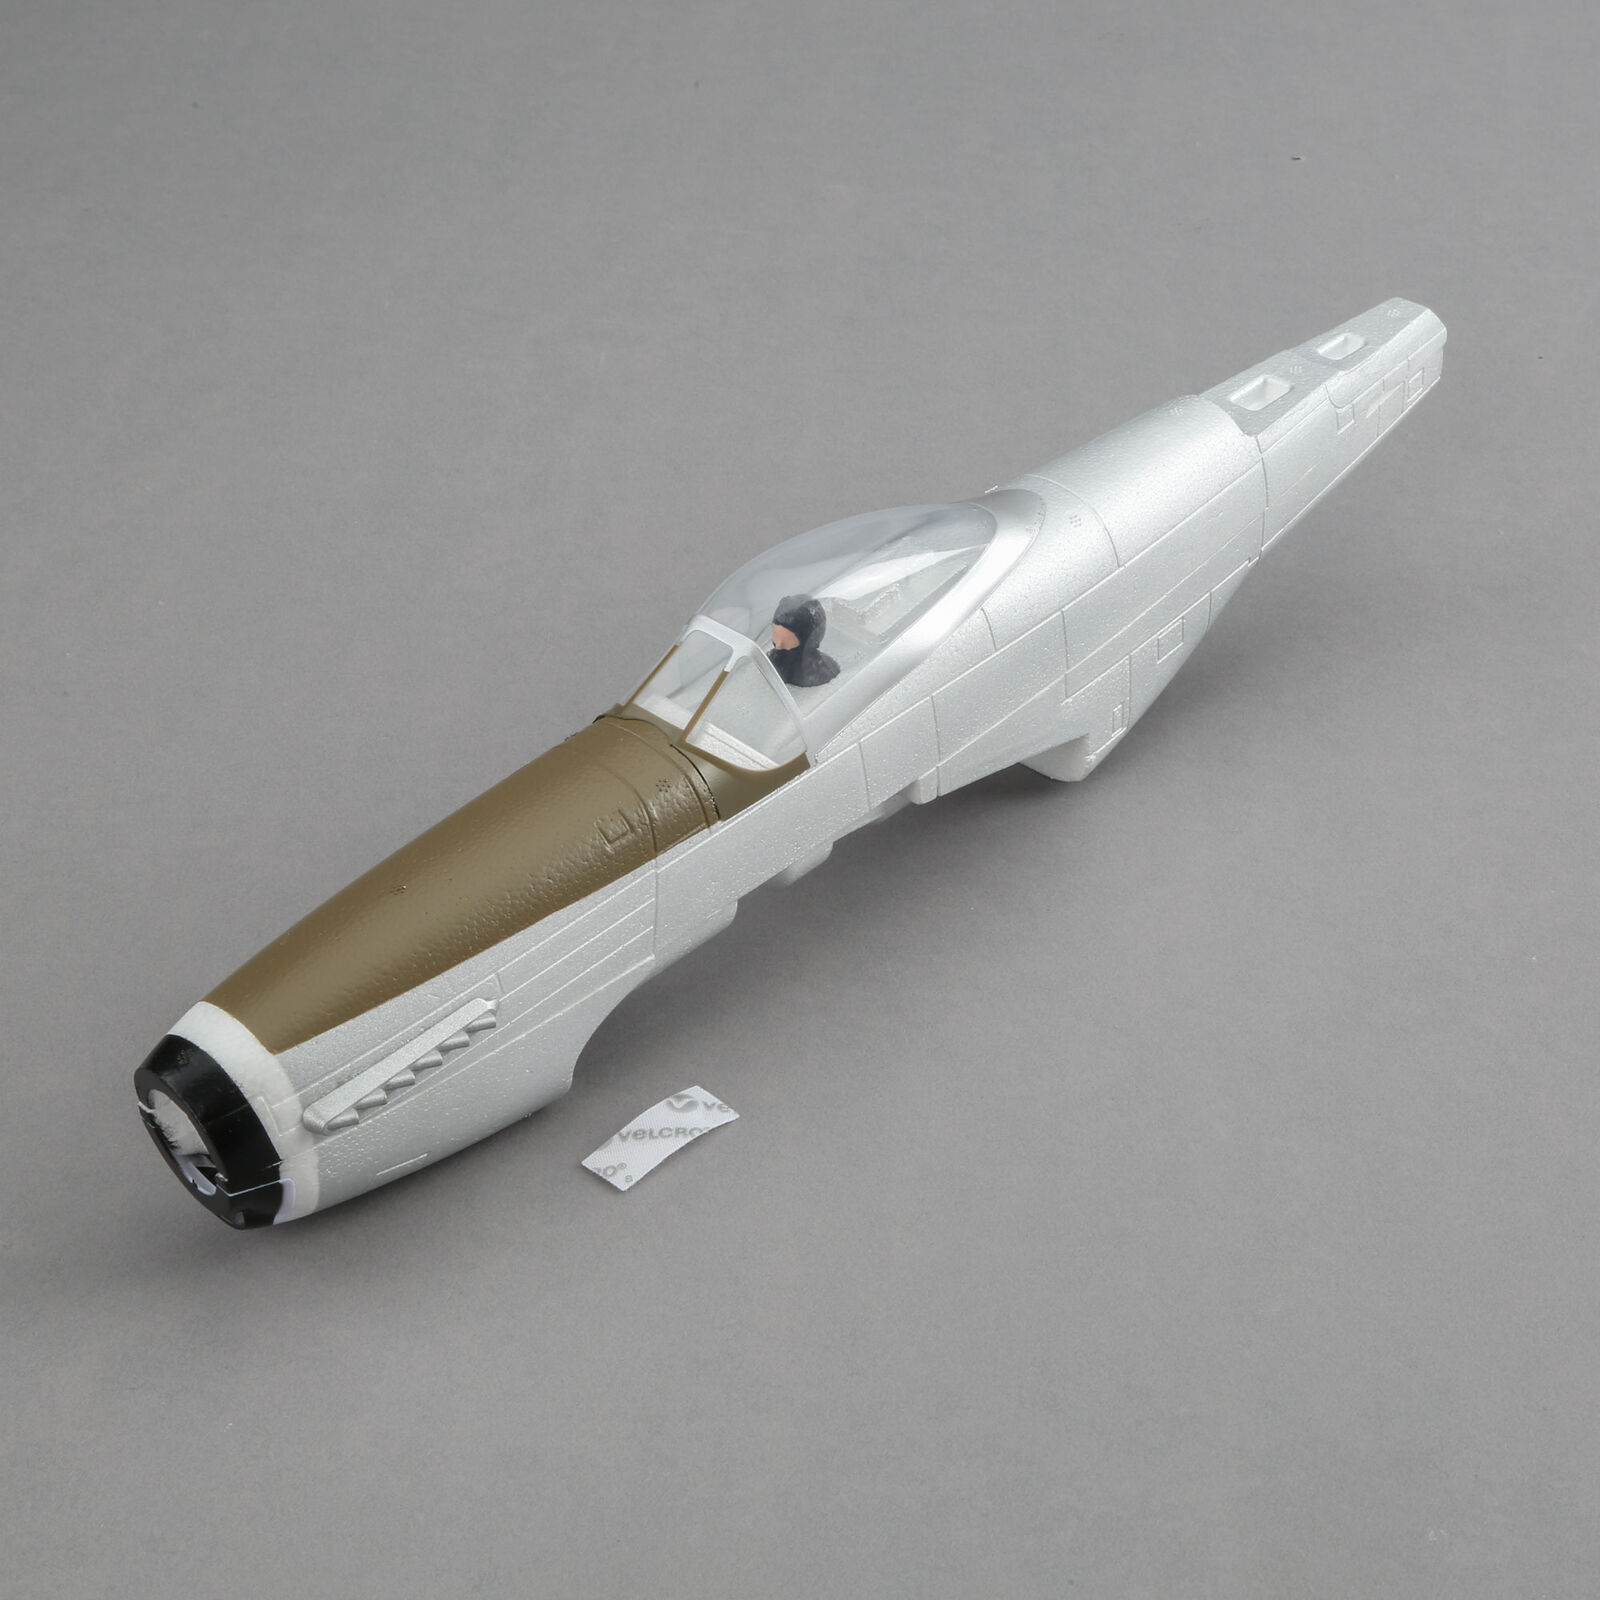 Fuselage with Accessories: UMX P-51 BL